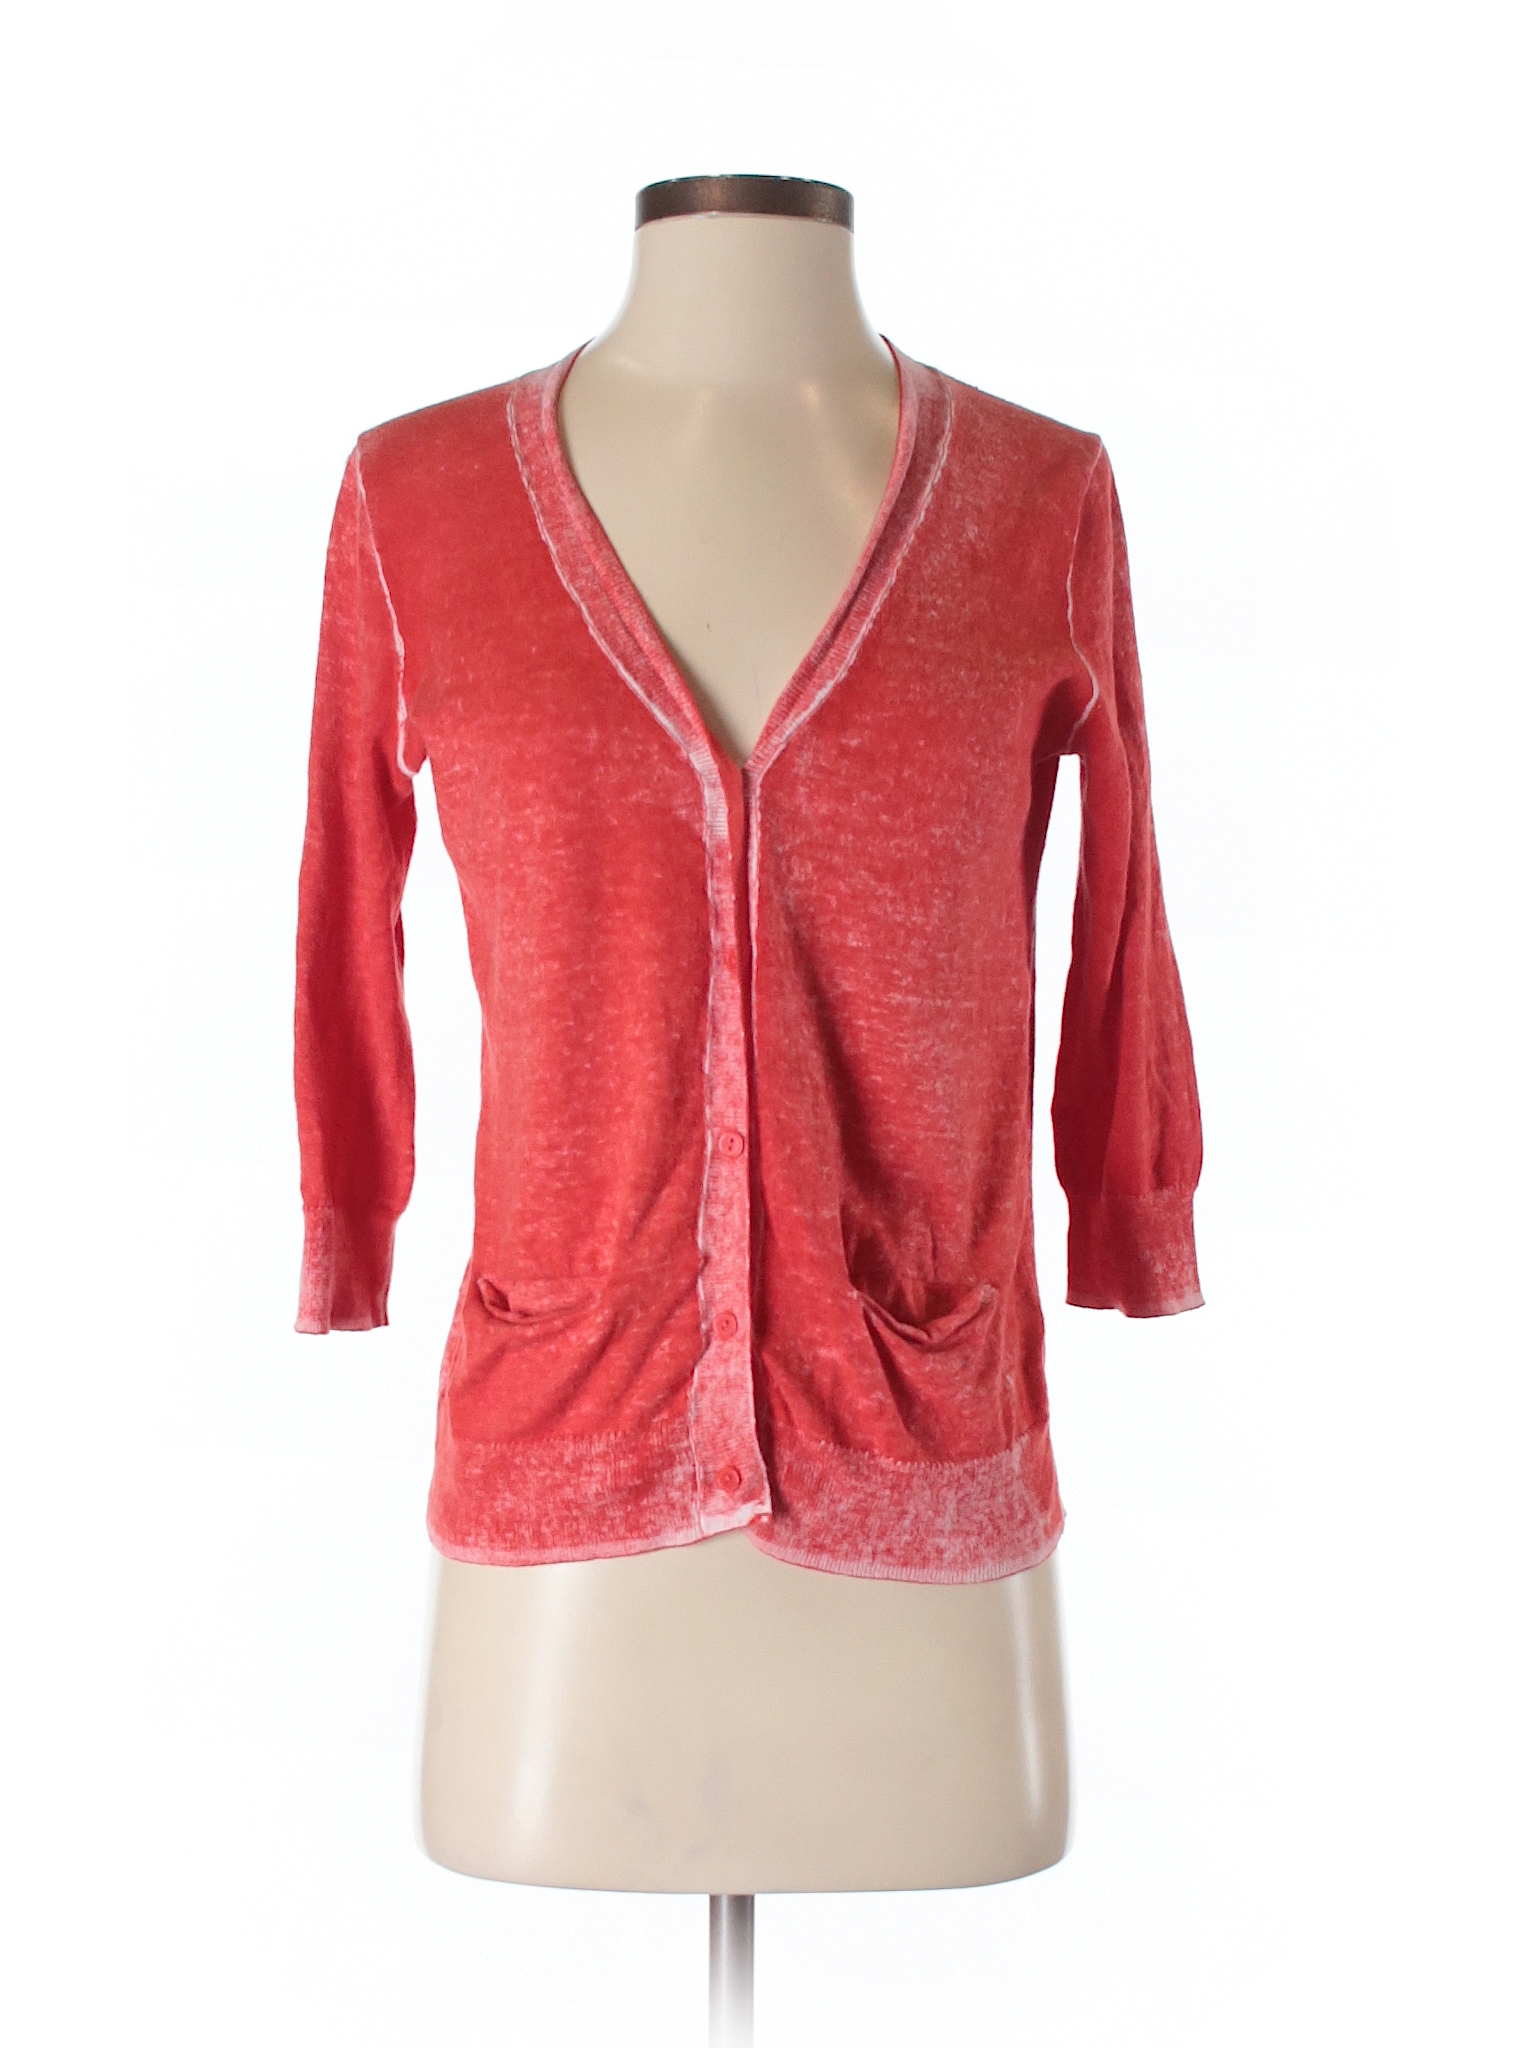 Gap 100% Cotton Solid Red Cardigan Size XS - 98% off | thredUP